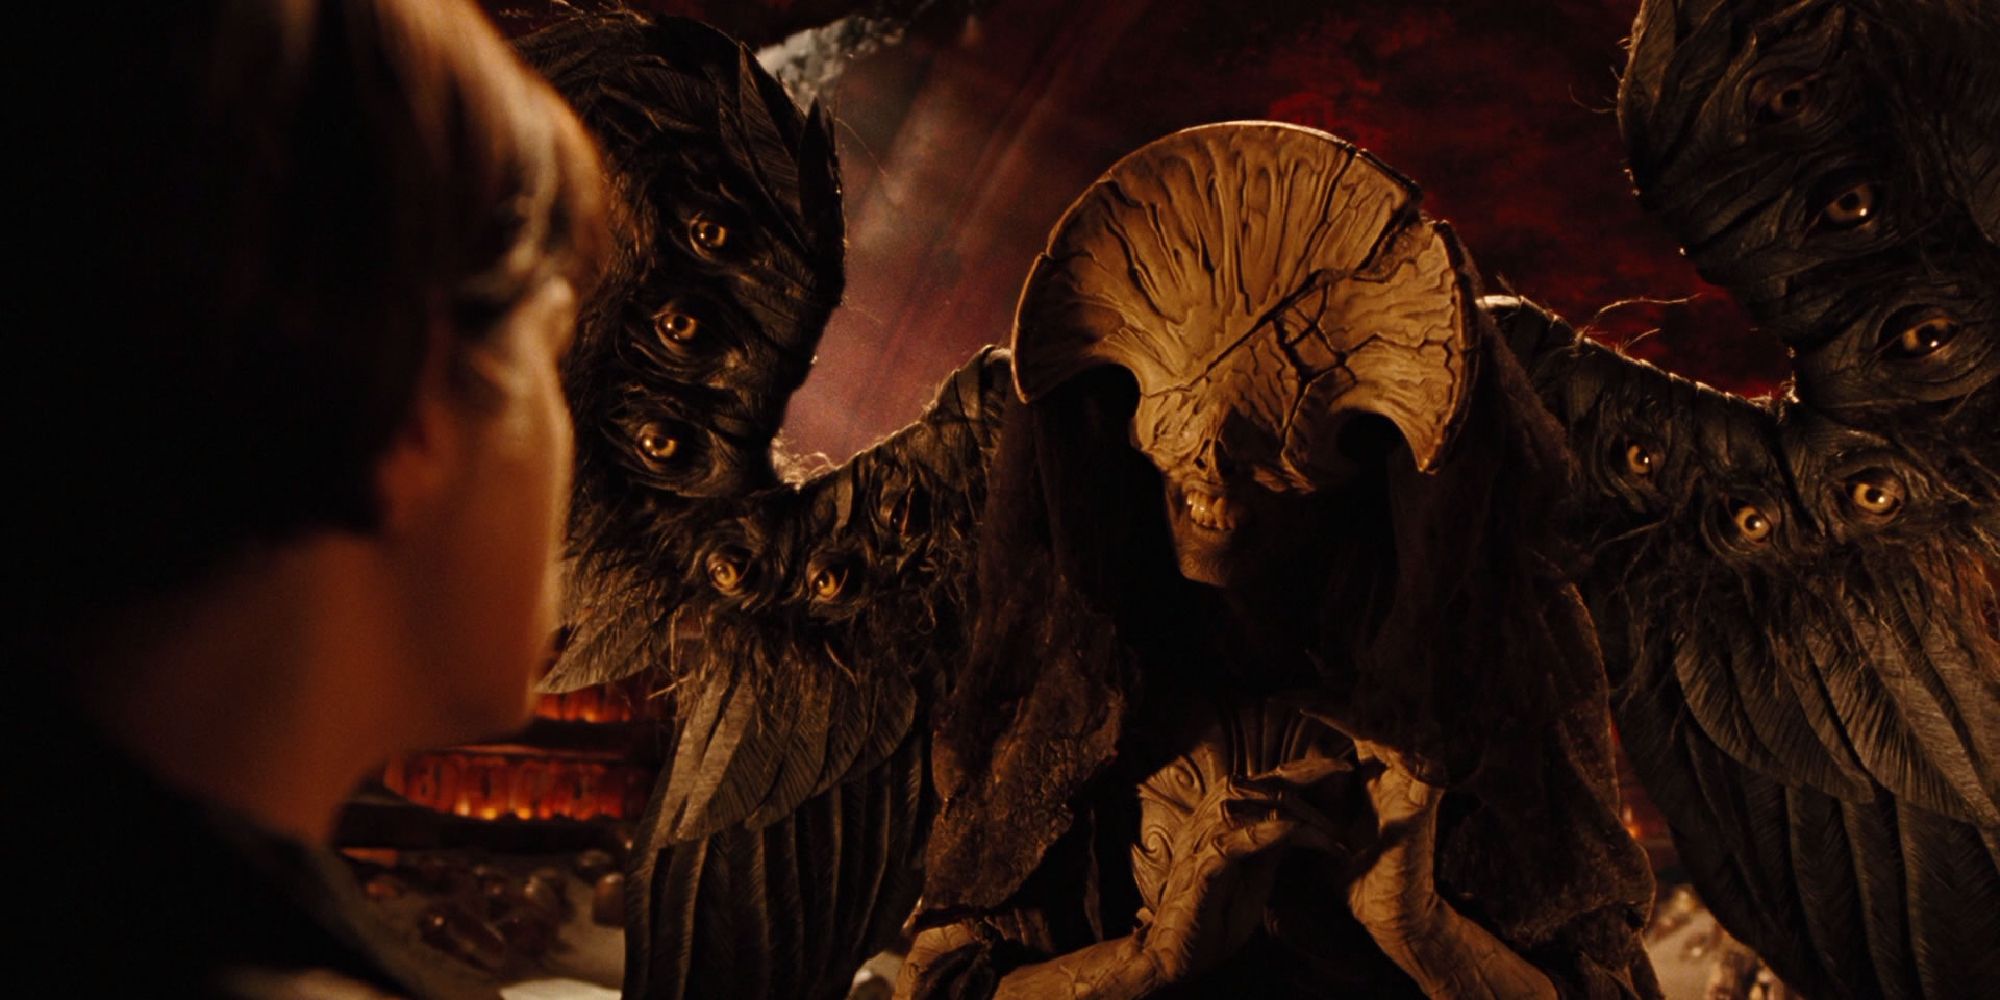 The creatively terrifying angel of death as seen in Hellboy 2.